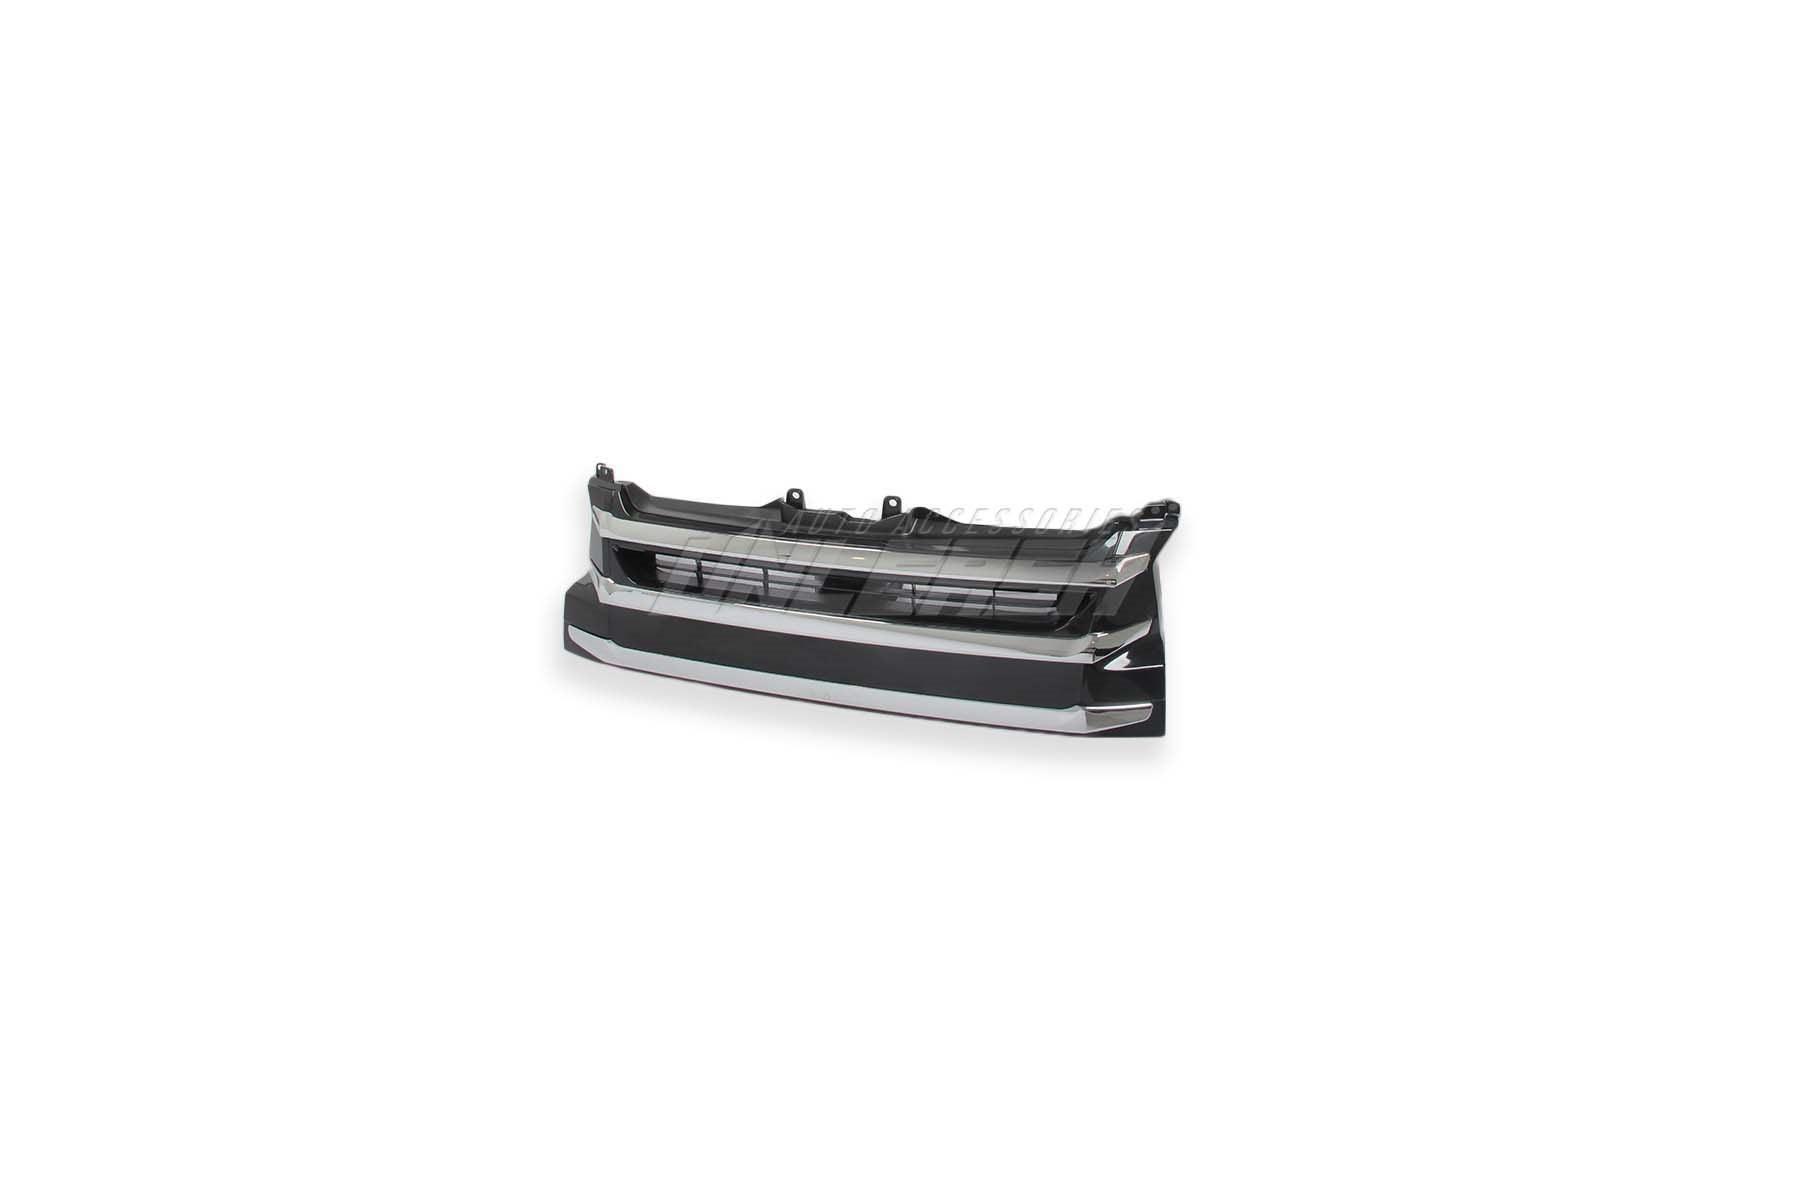 Grille for Toyota Hiace Narrow Body 2014- 2019 Model - Prolink Performance